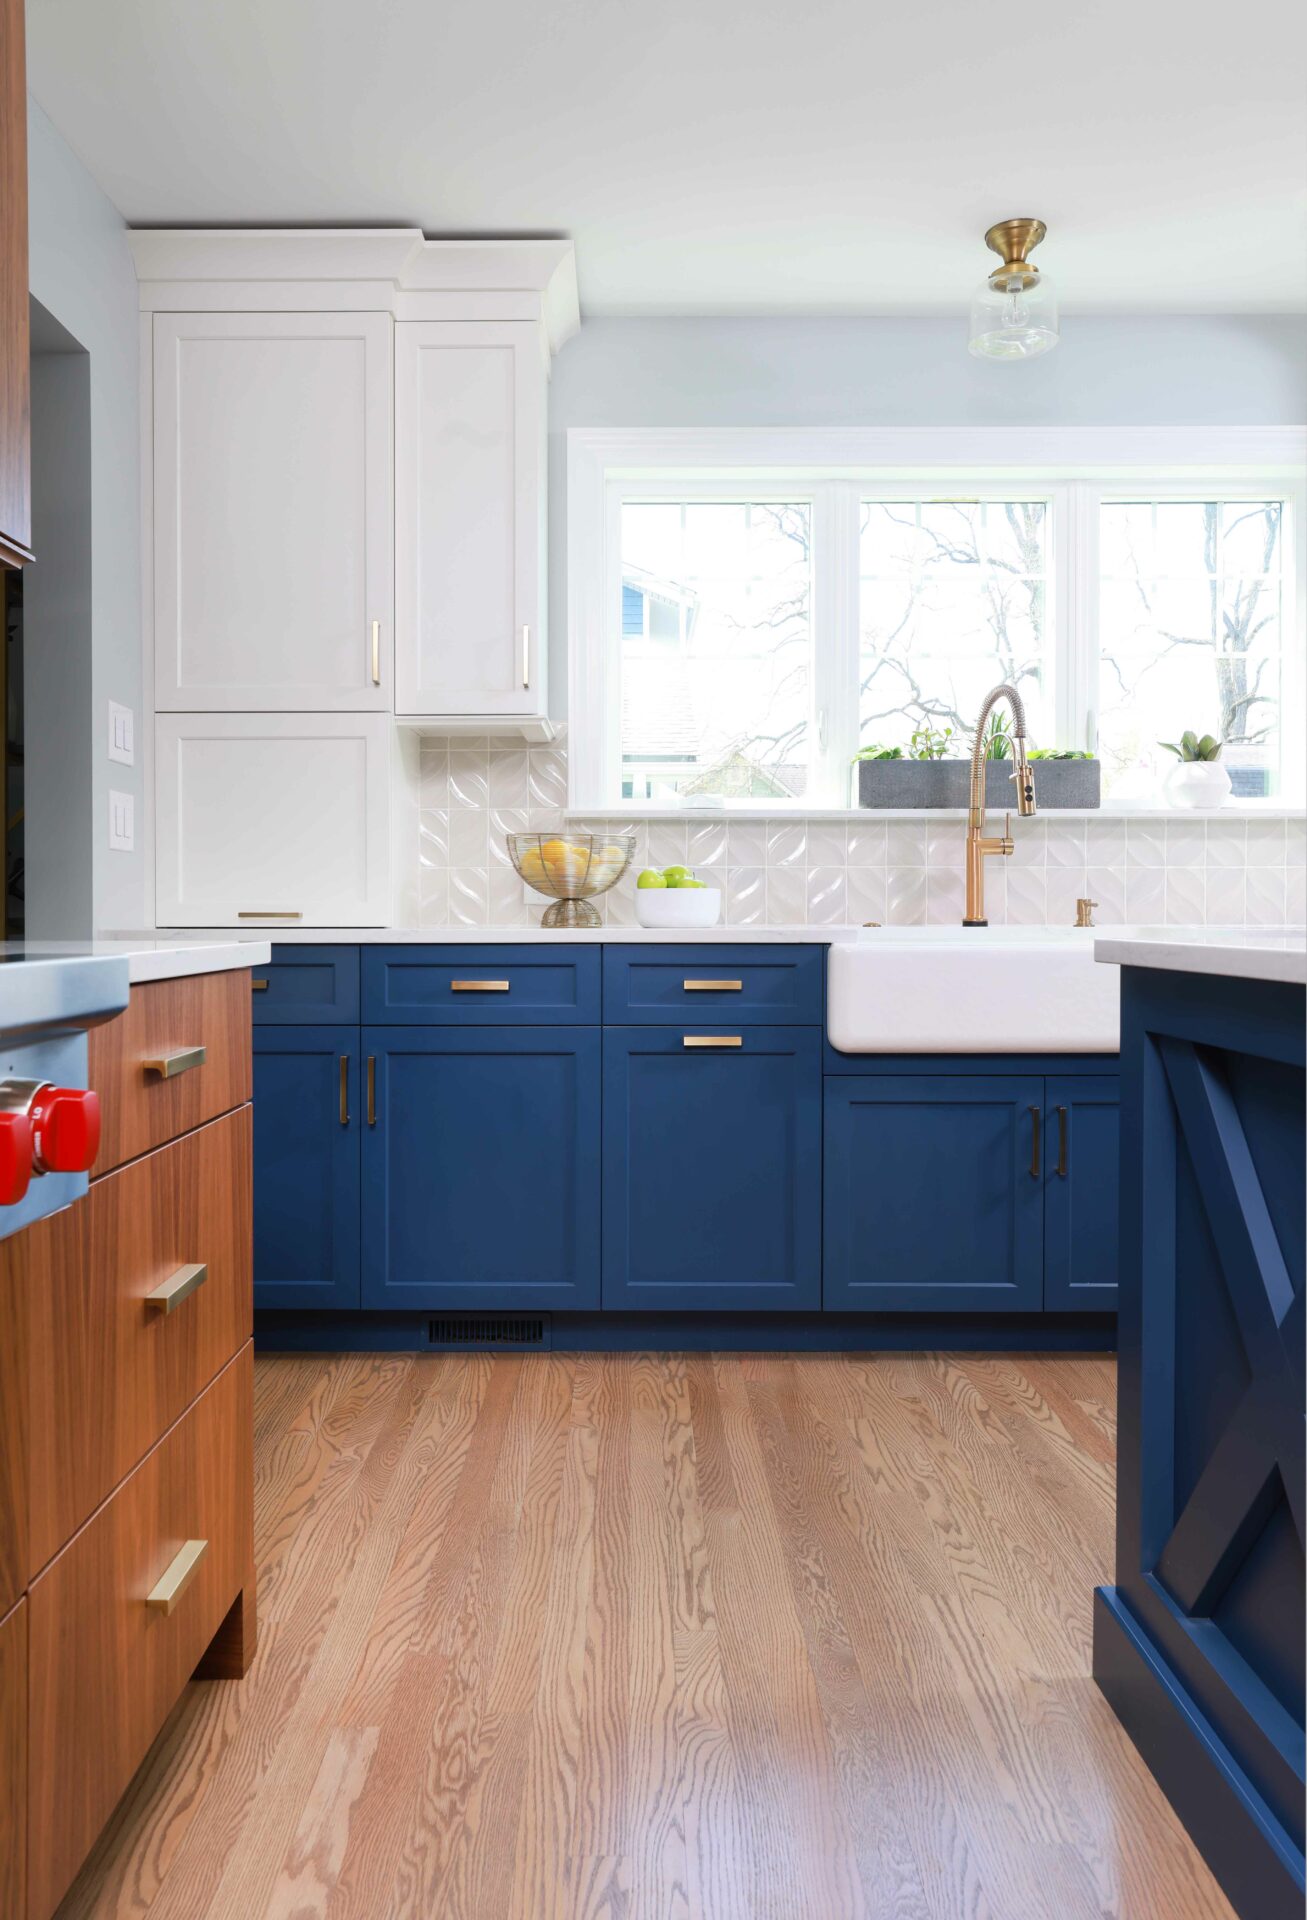 Tri-tone kitchen with walnut cabinets, blue cabinets, and white cabinets